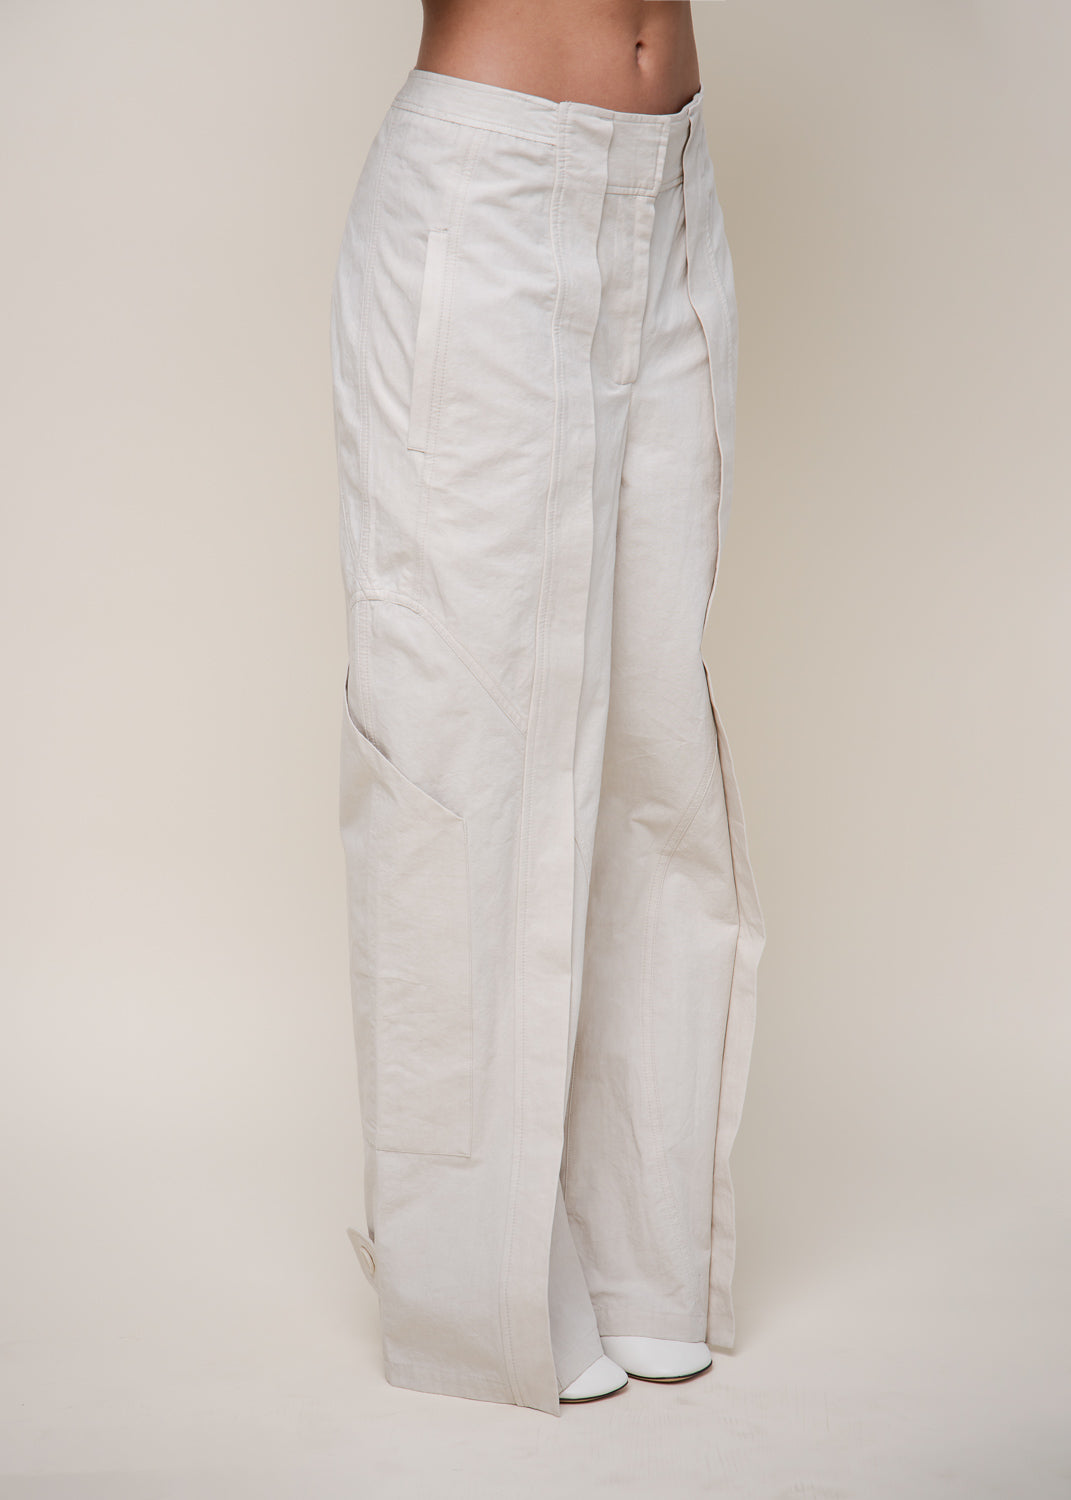 Cocosolo Trousers